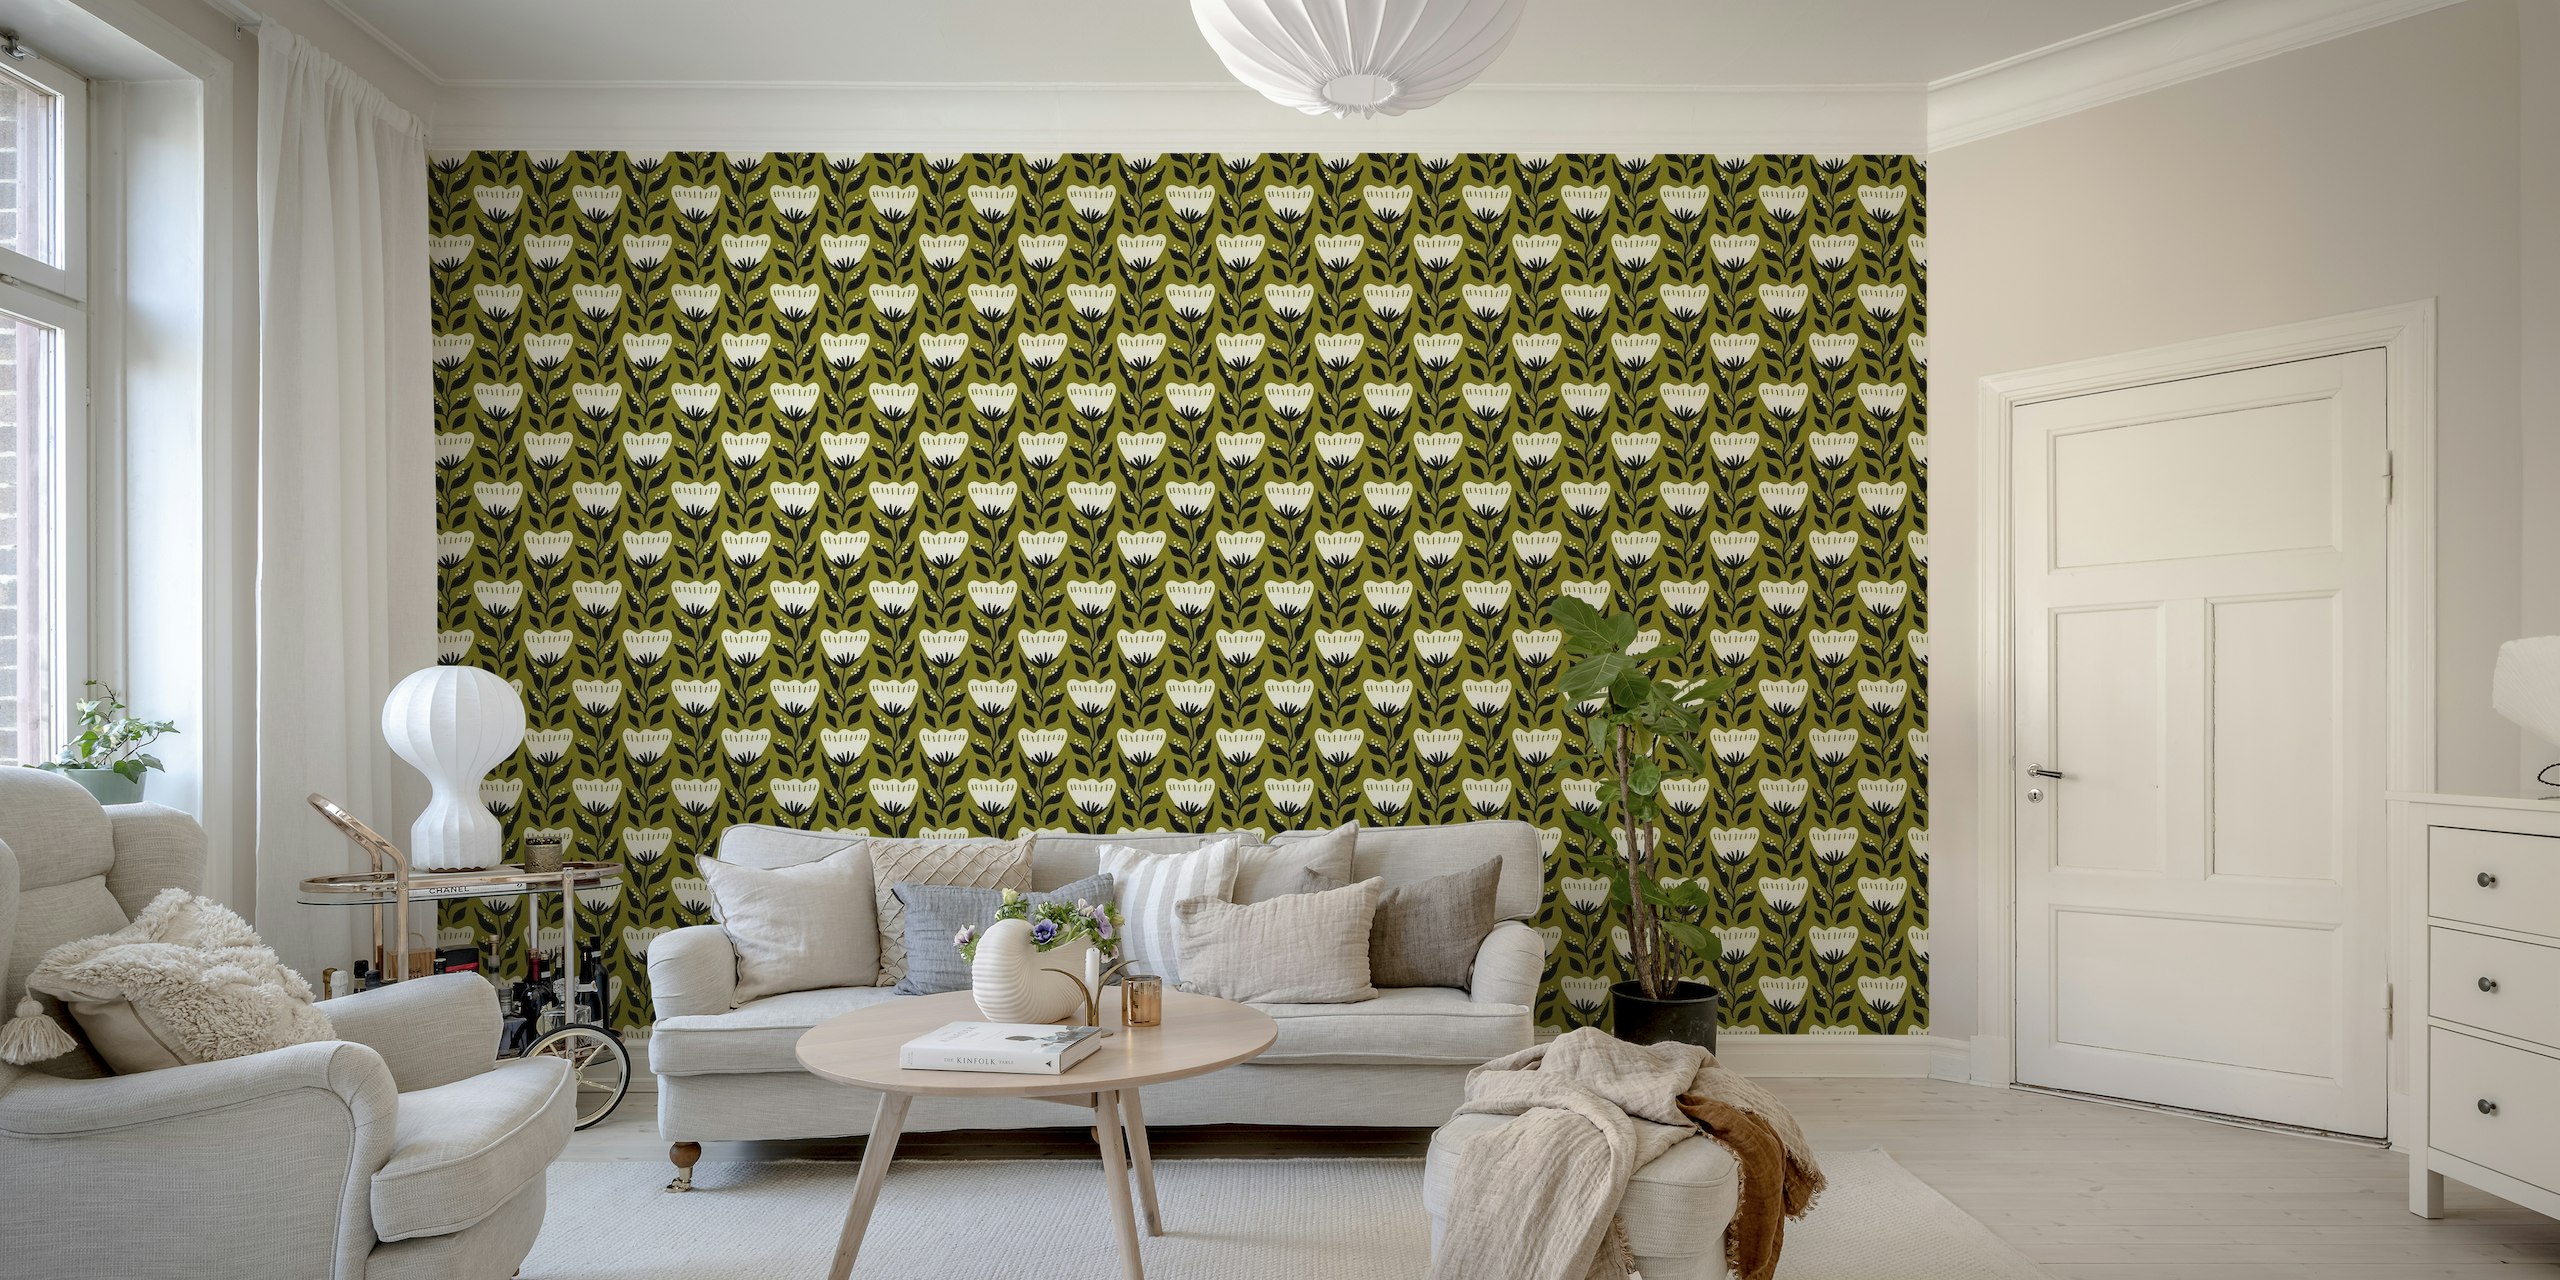 Soothing sage green wall mural with white floral patterns